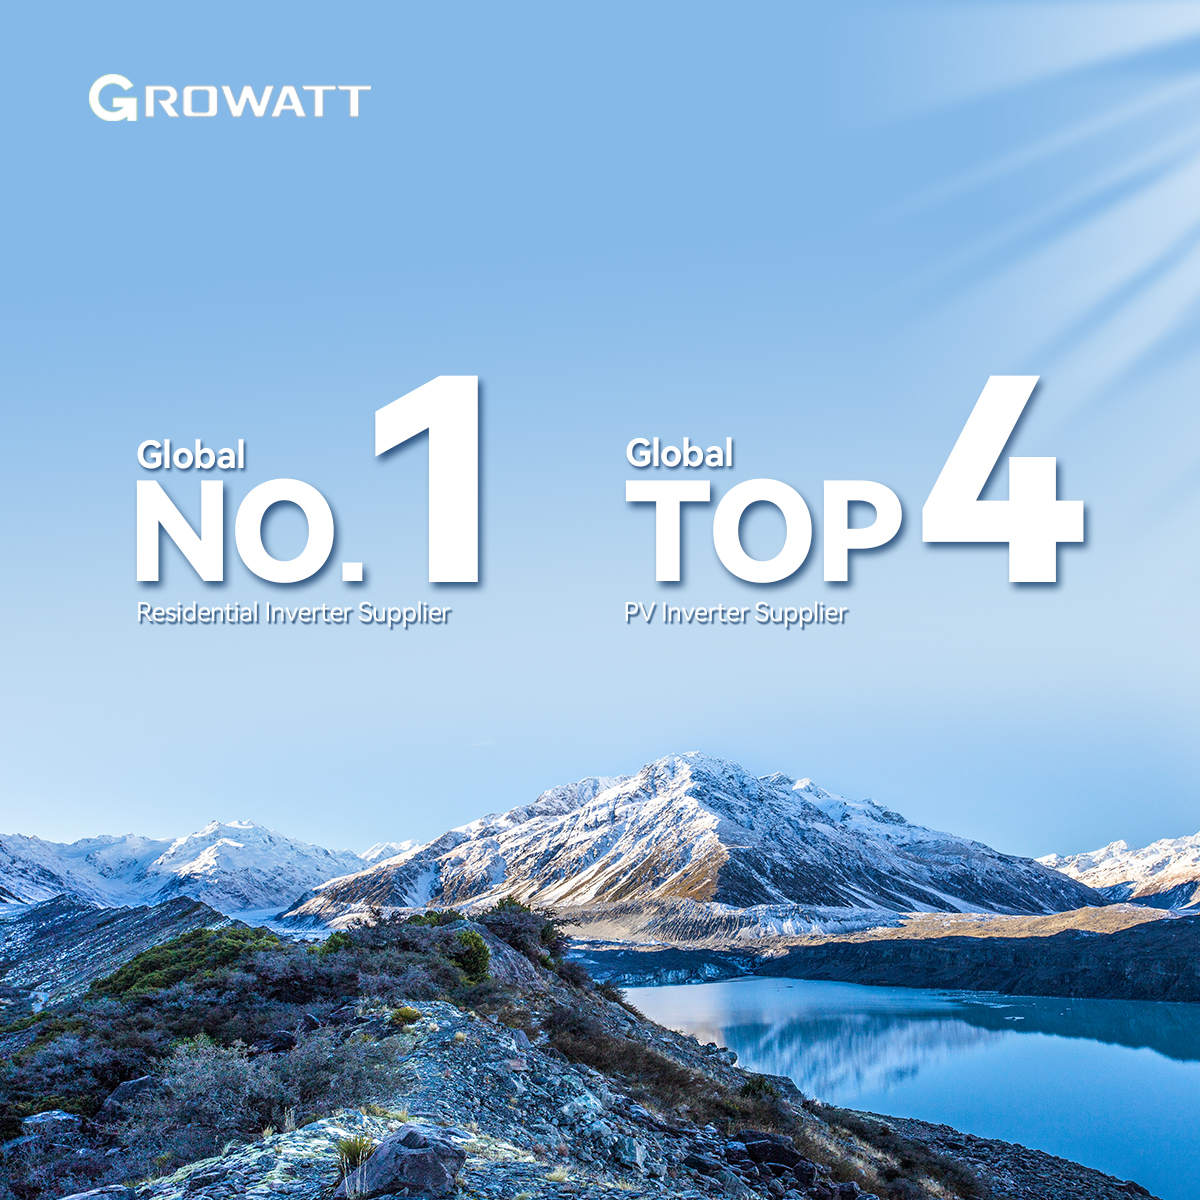 Growatt continues to be the world’s largest residential inverter supplier.jpg